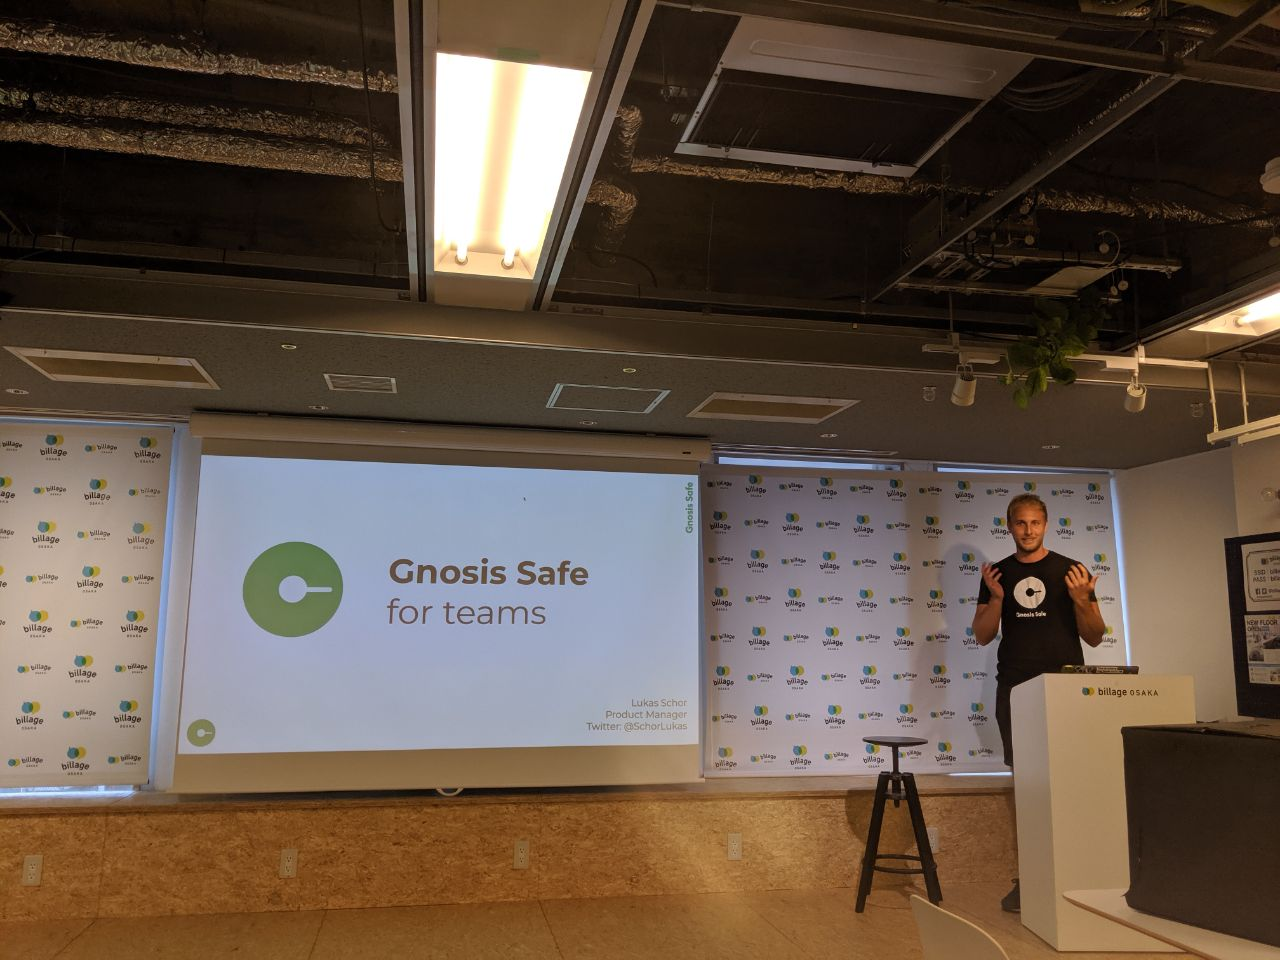 Safe co-founder, Lukas Schor, introducing the new “Gnosis Safe for teams” wallet, at Devcon Osaka (2019)